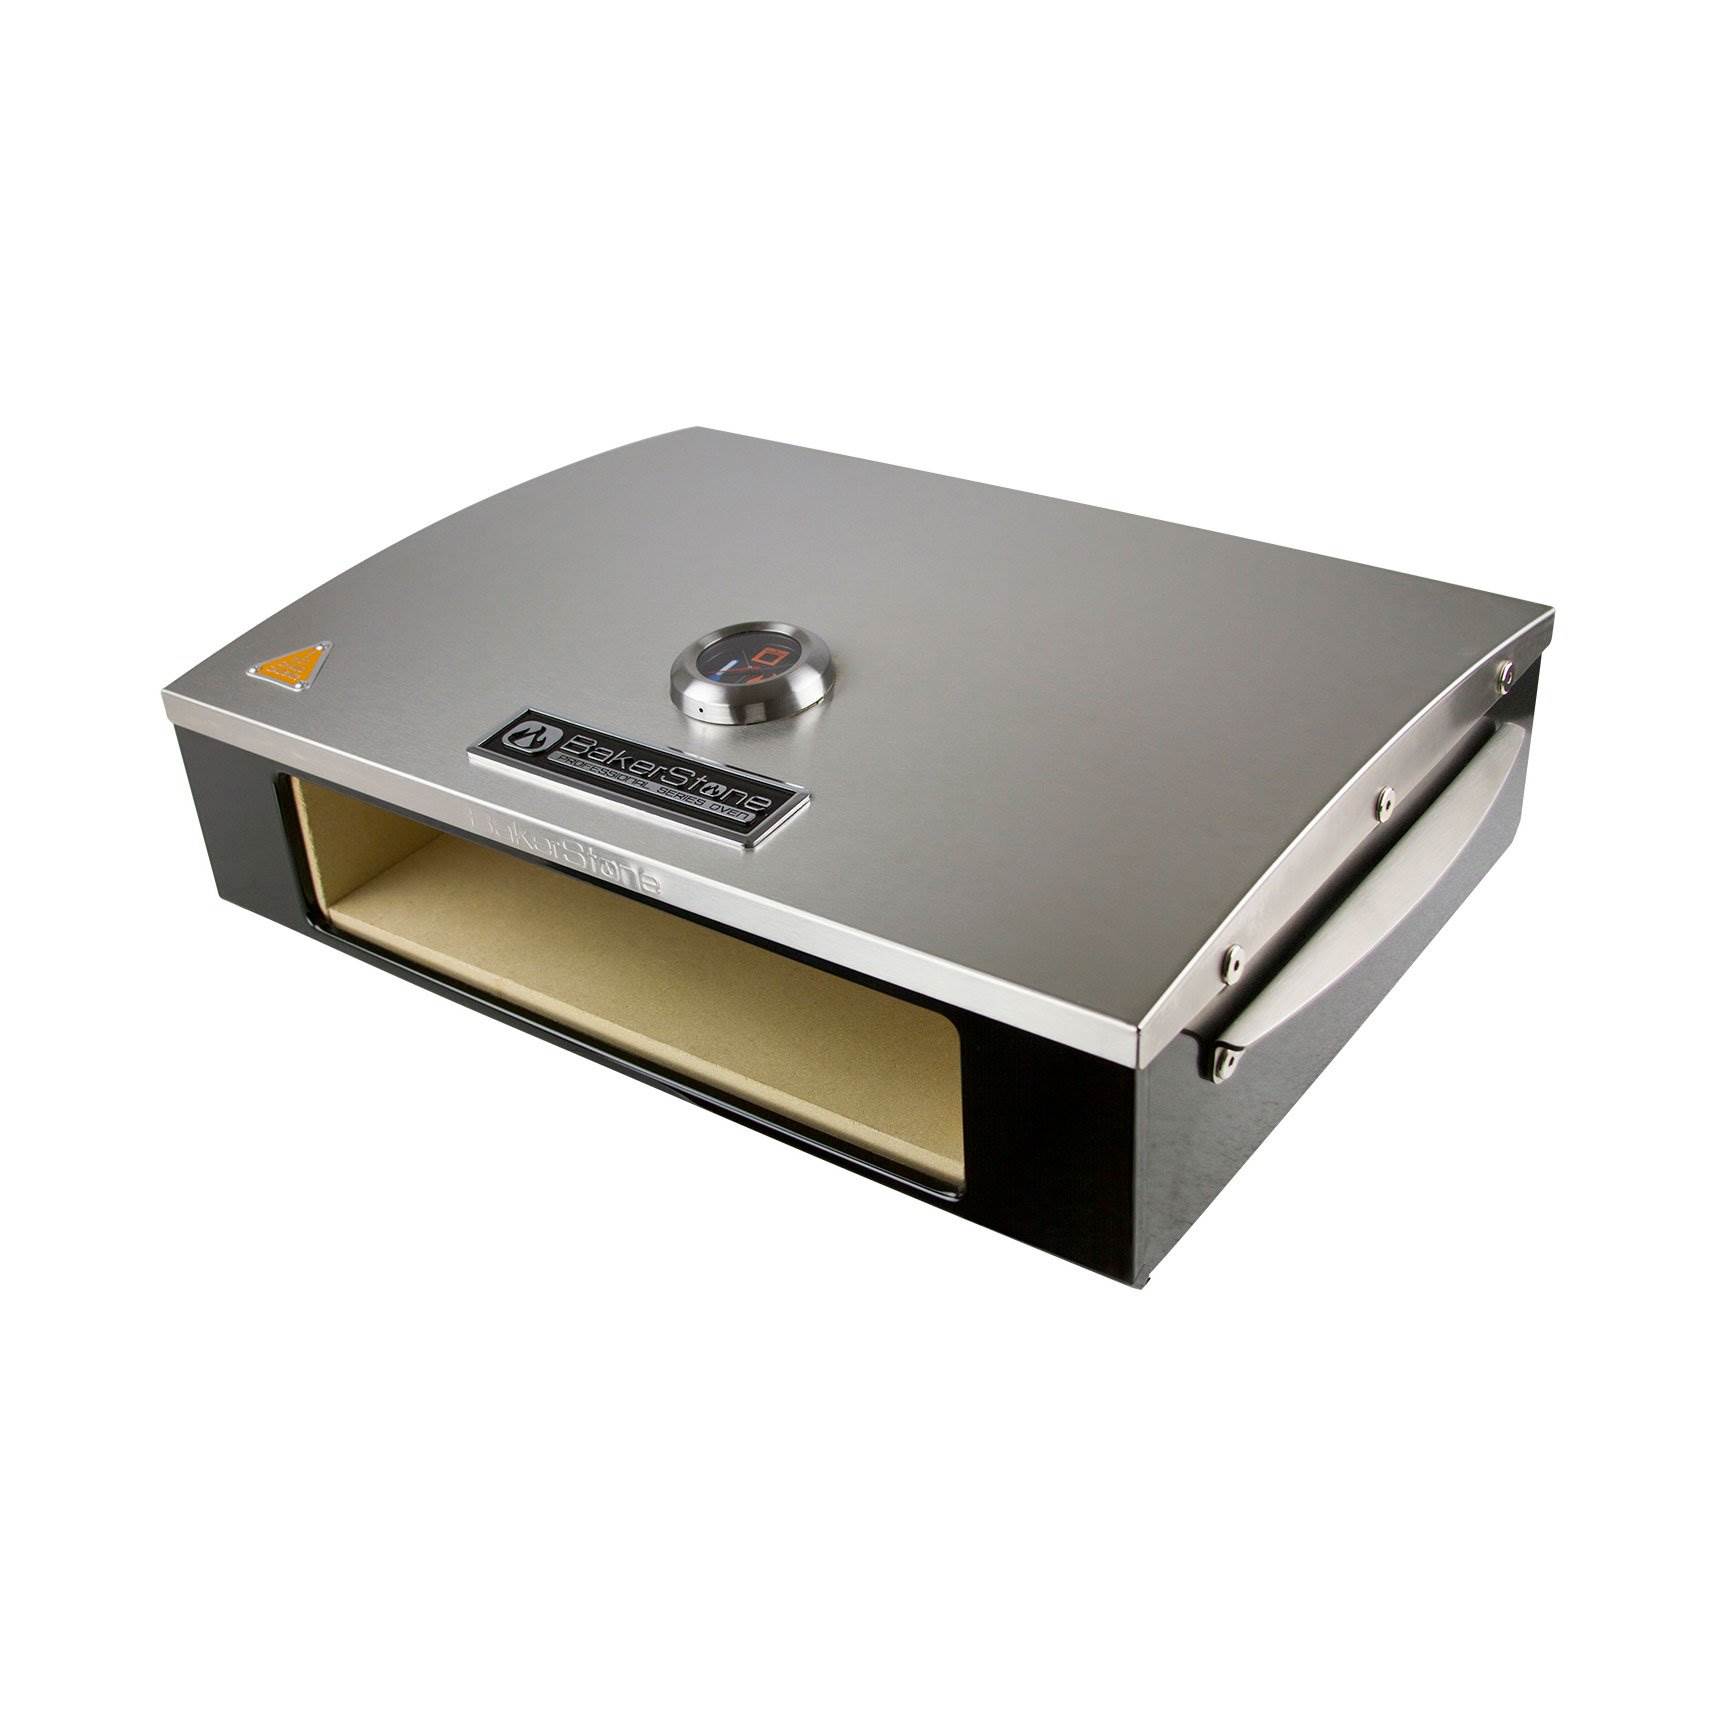 BakerStone Professional Series Grill Top Pizza Oven Box - image 4 of 7